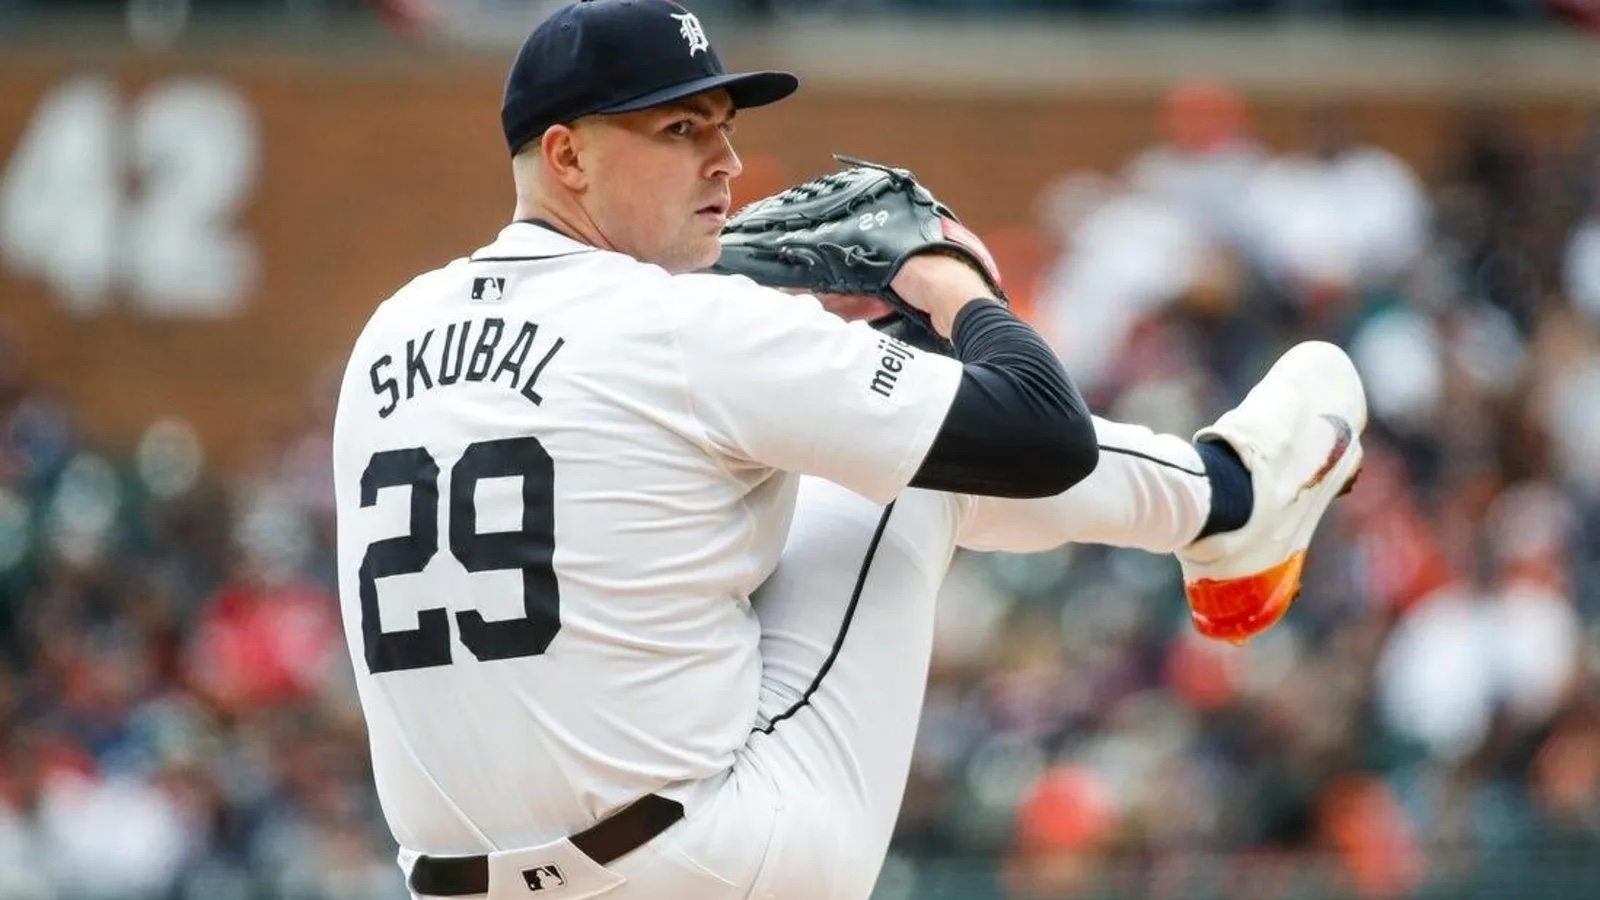 Skubal Suppresses the Royals Bats, as Tigers Take the Series